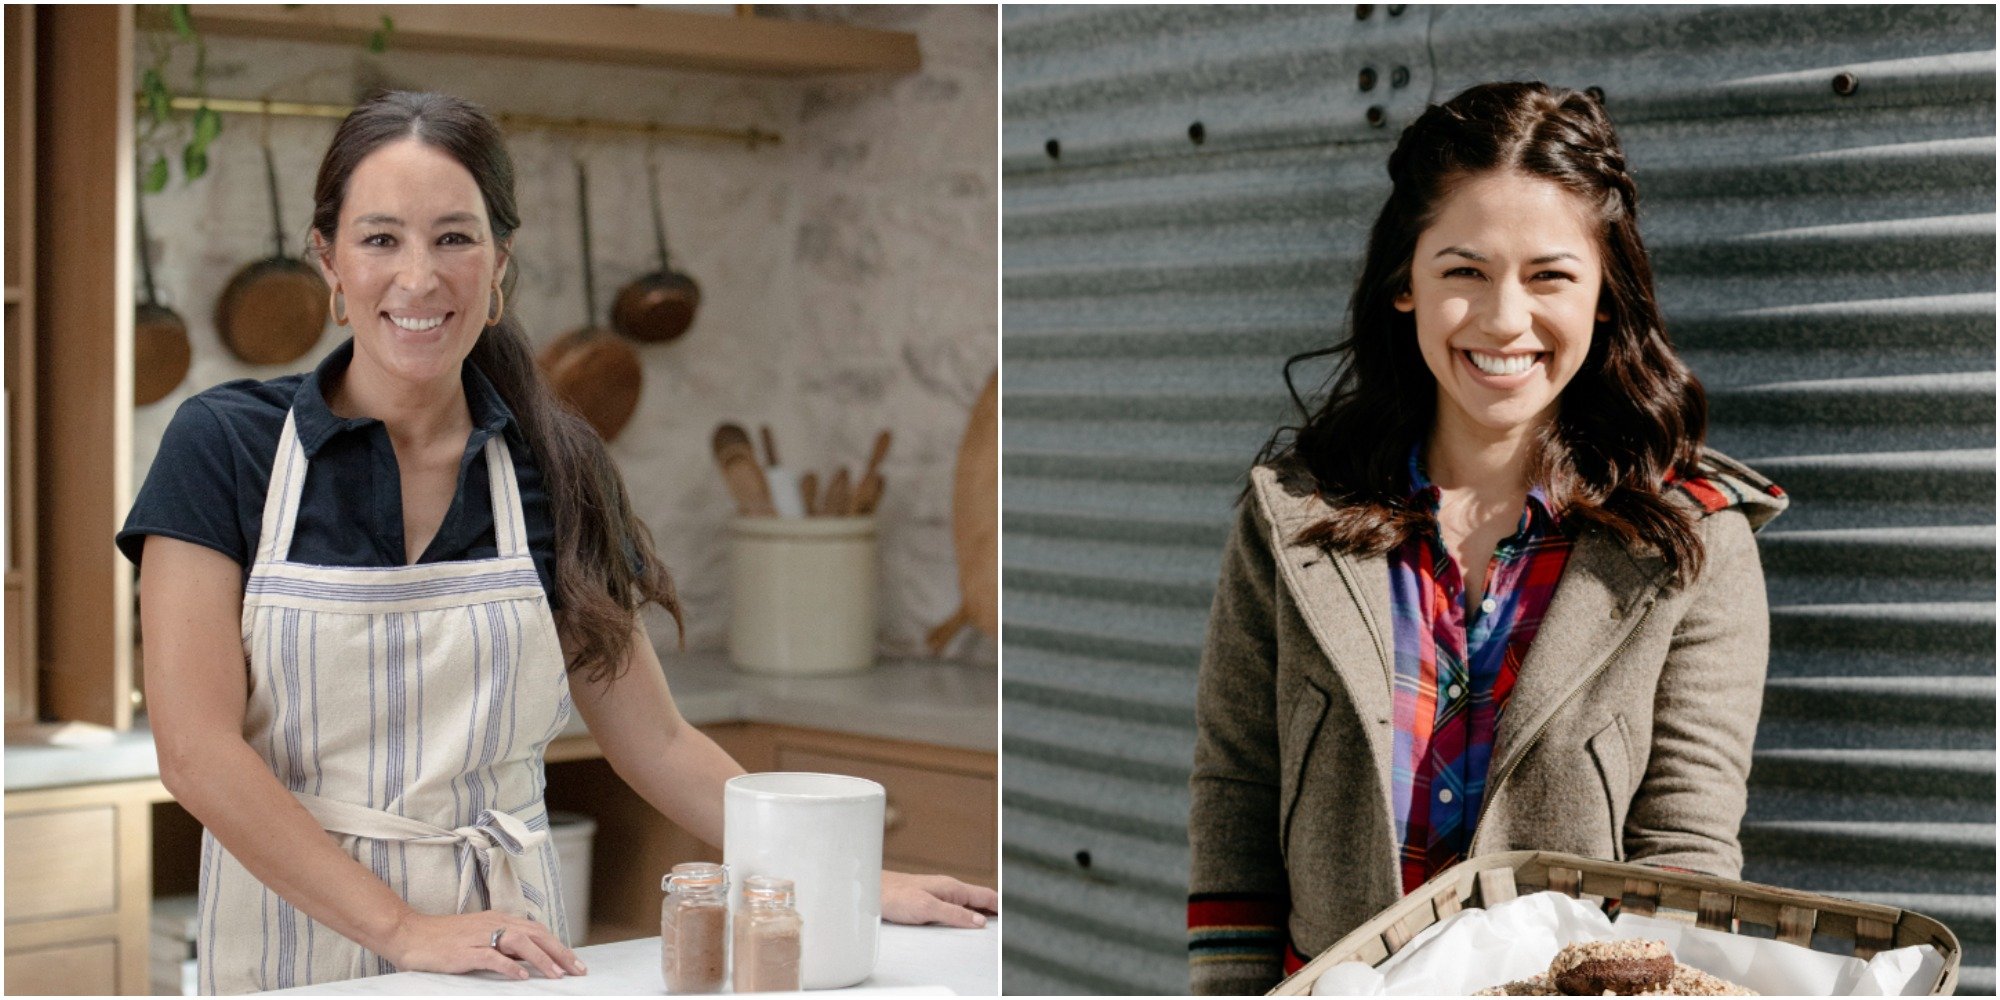 Molly Yeh and Joanna Gaines star in "Molly Yeh's Magnolia Adventure" on Food Network.